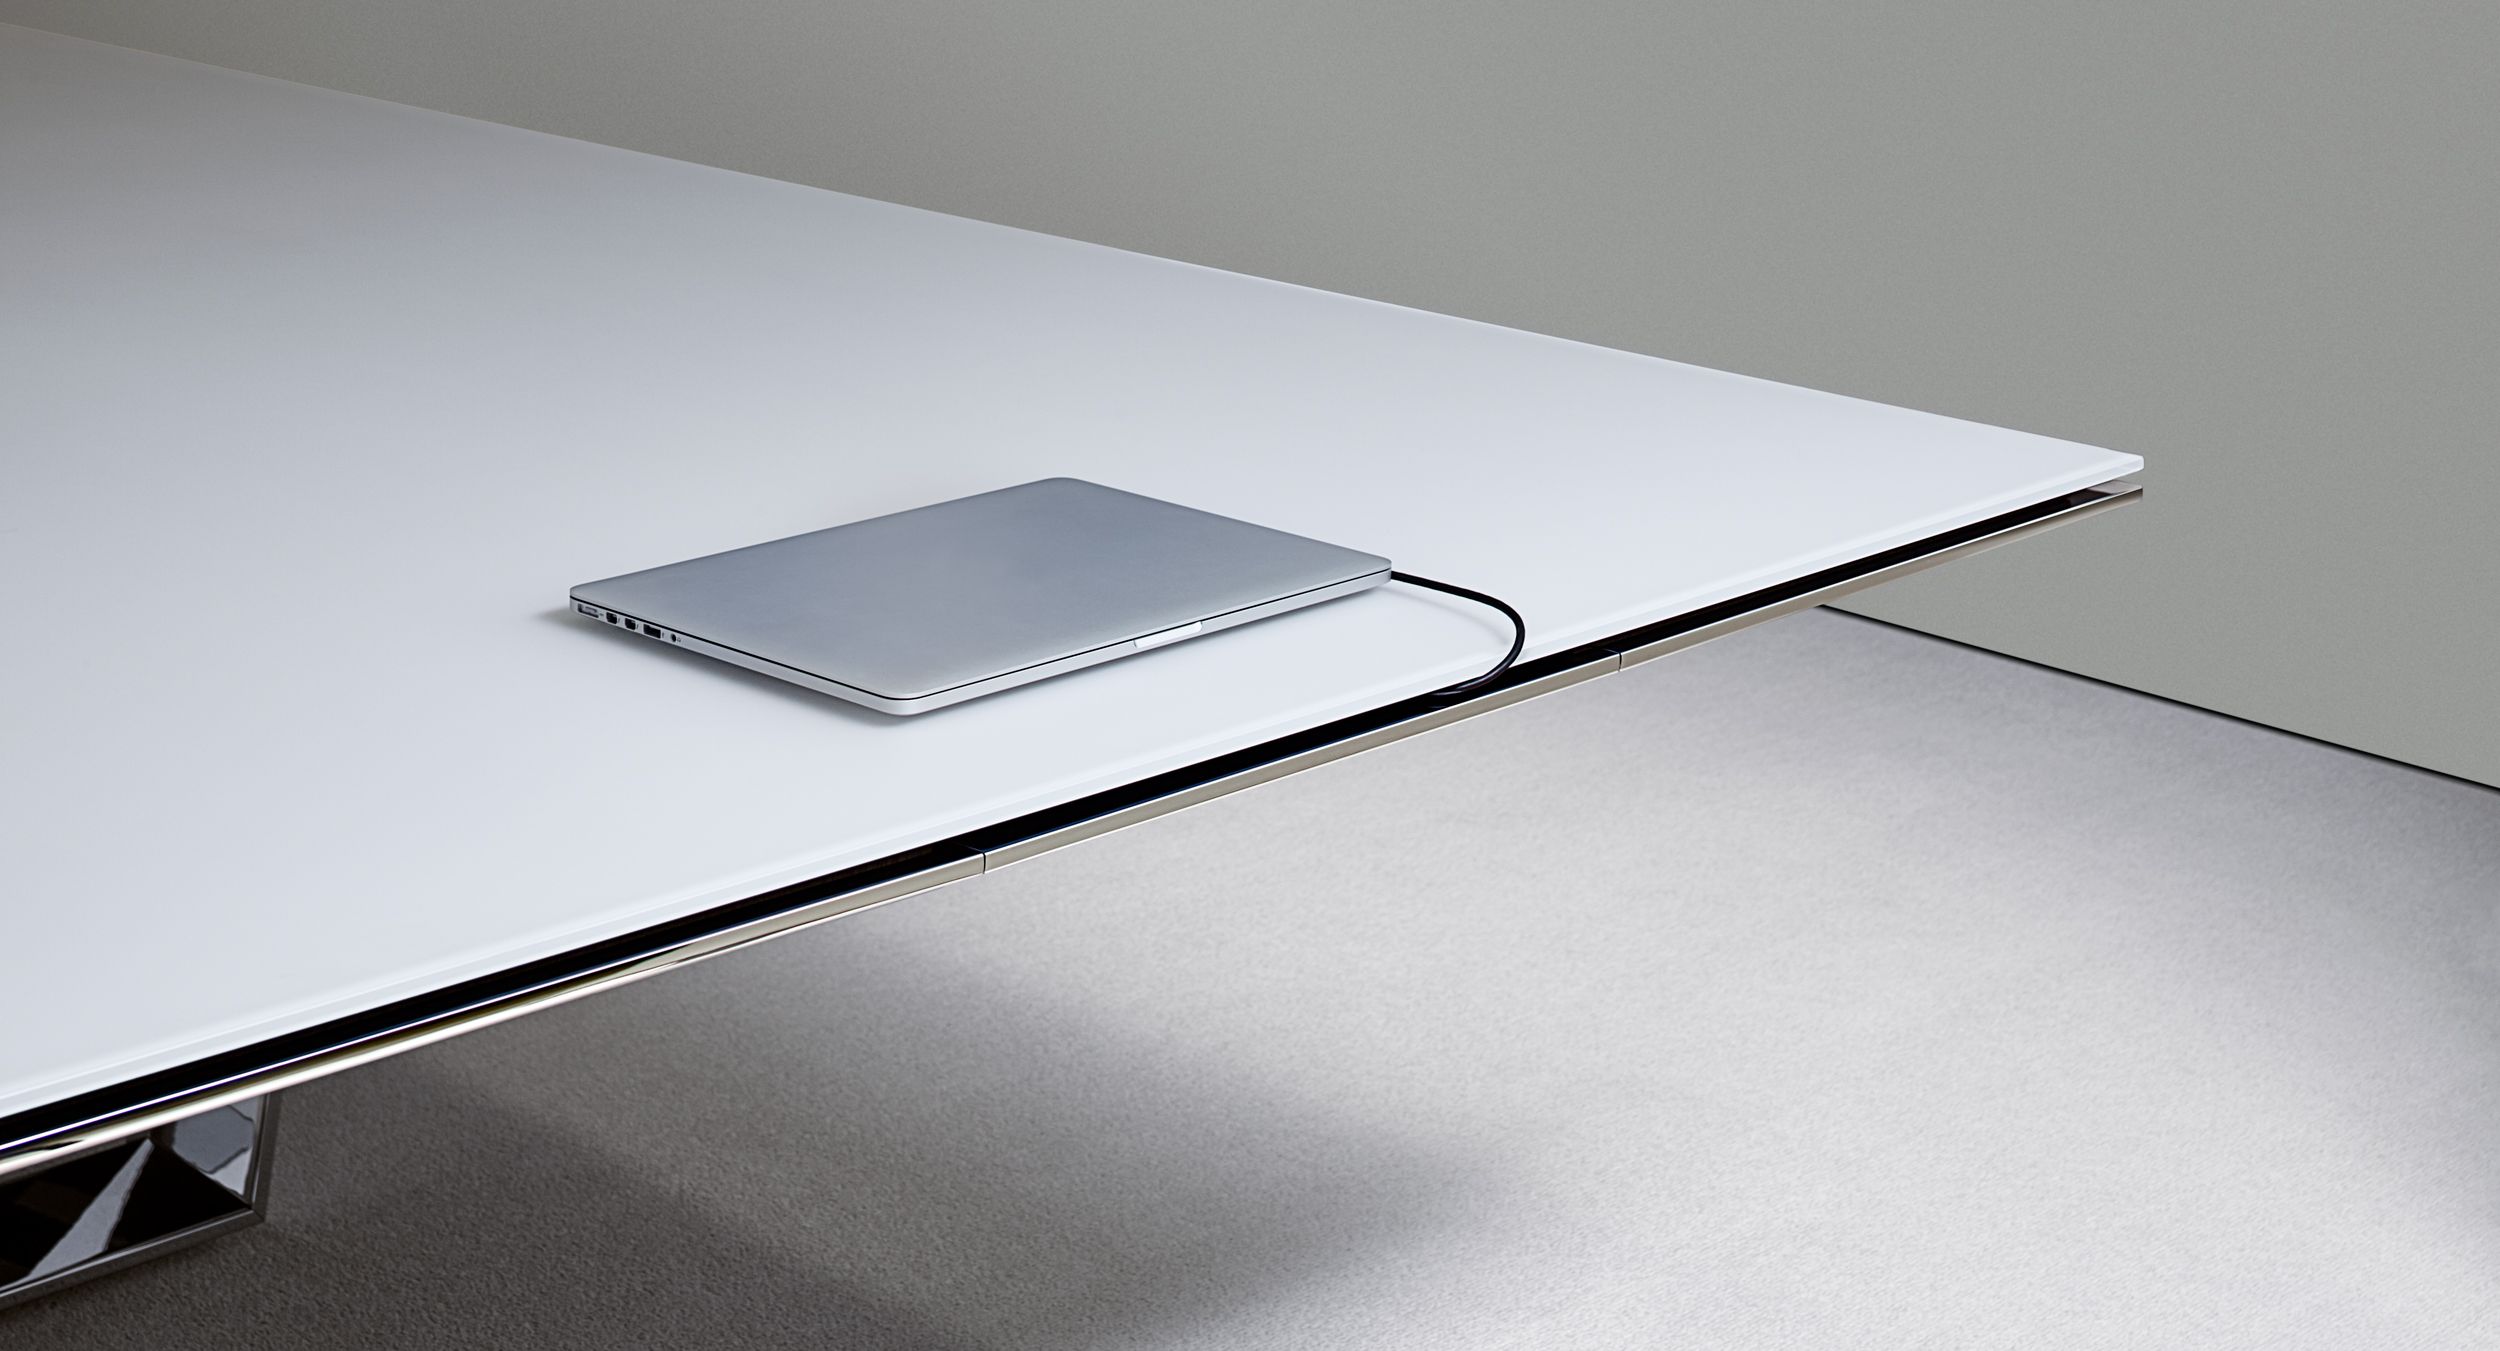 Cables exit gracefully from a continuous edge reveal above the concealed drawer, eliminating the typical mess of wires. 